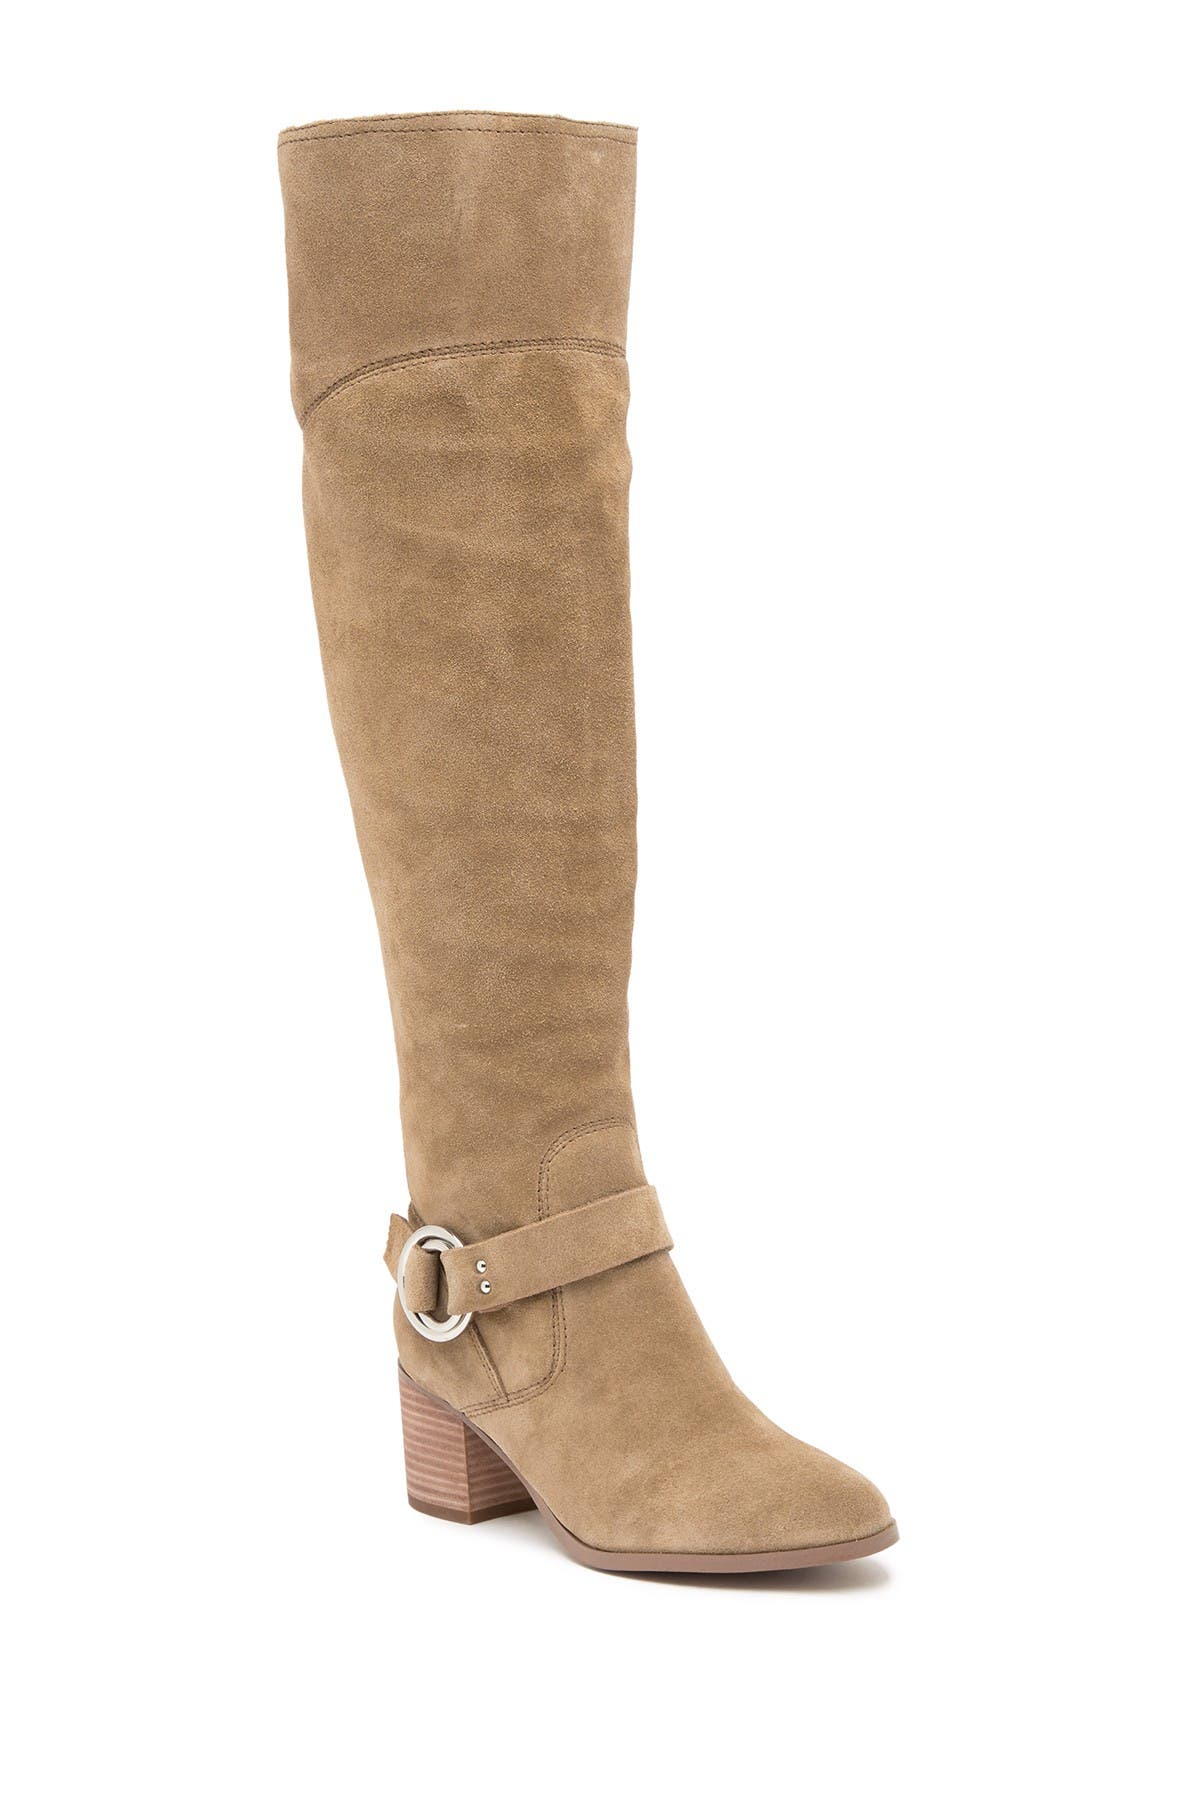 Marc Fisher | Editer Over-the-Knee Boot 